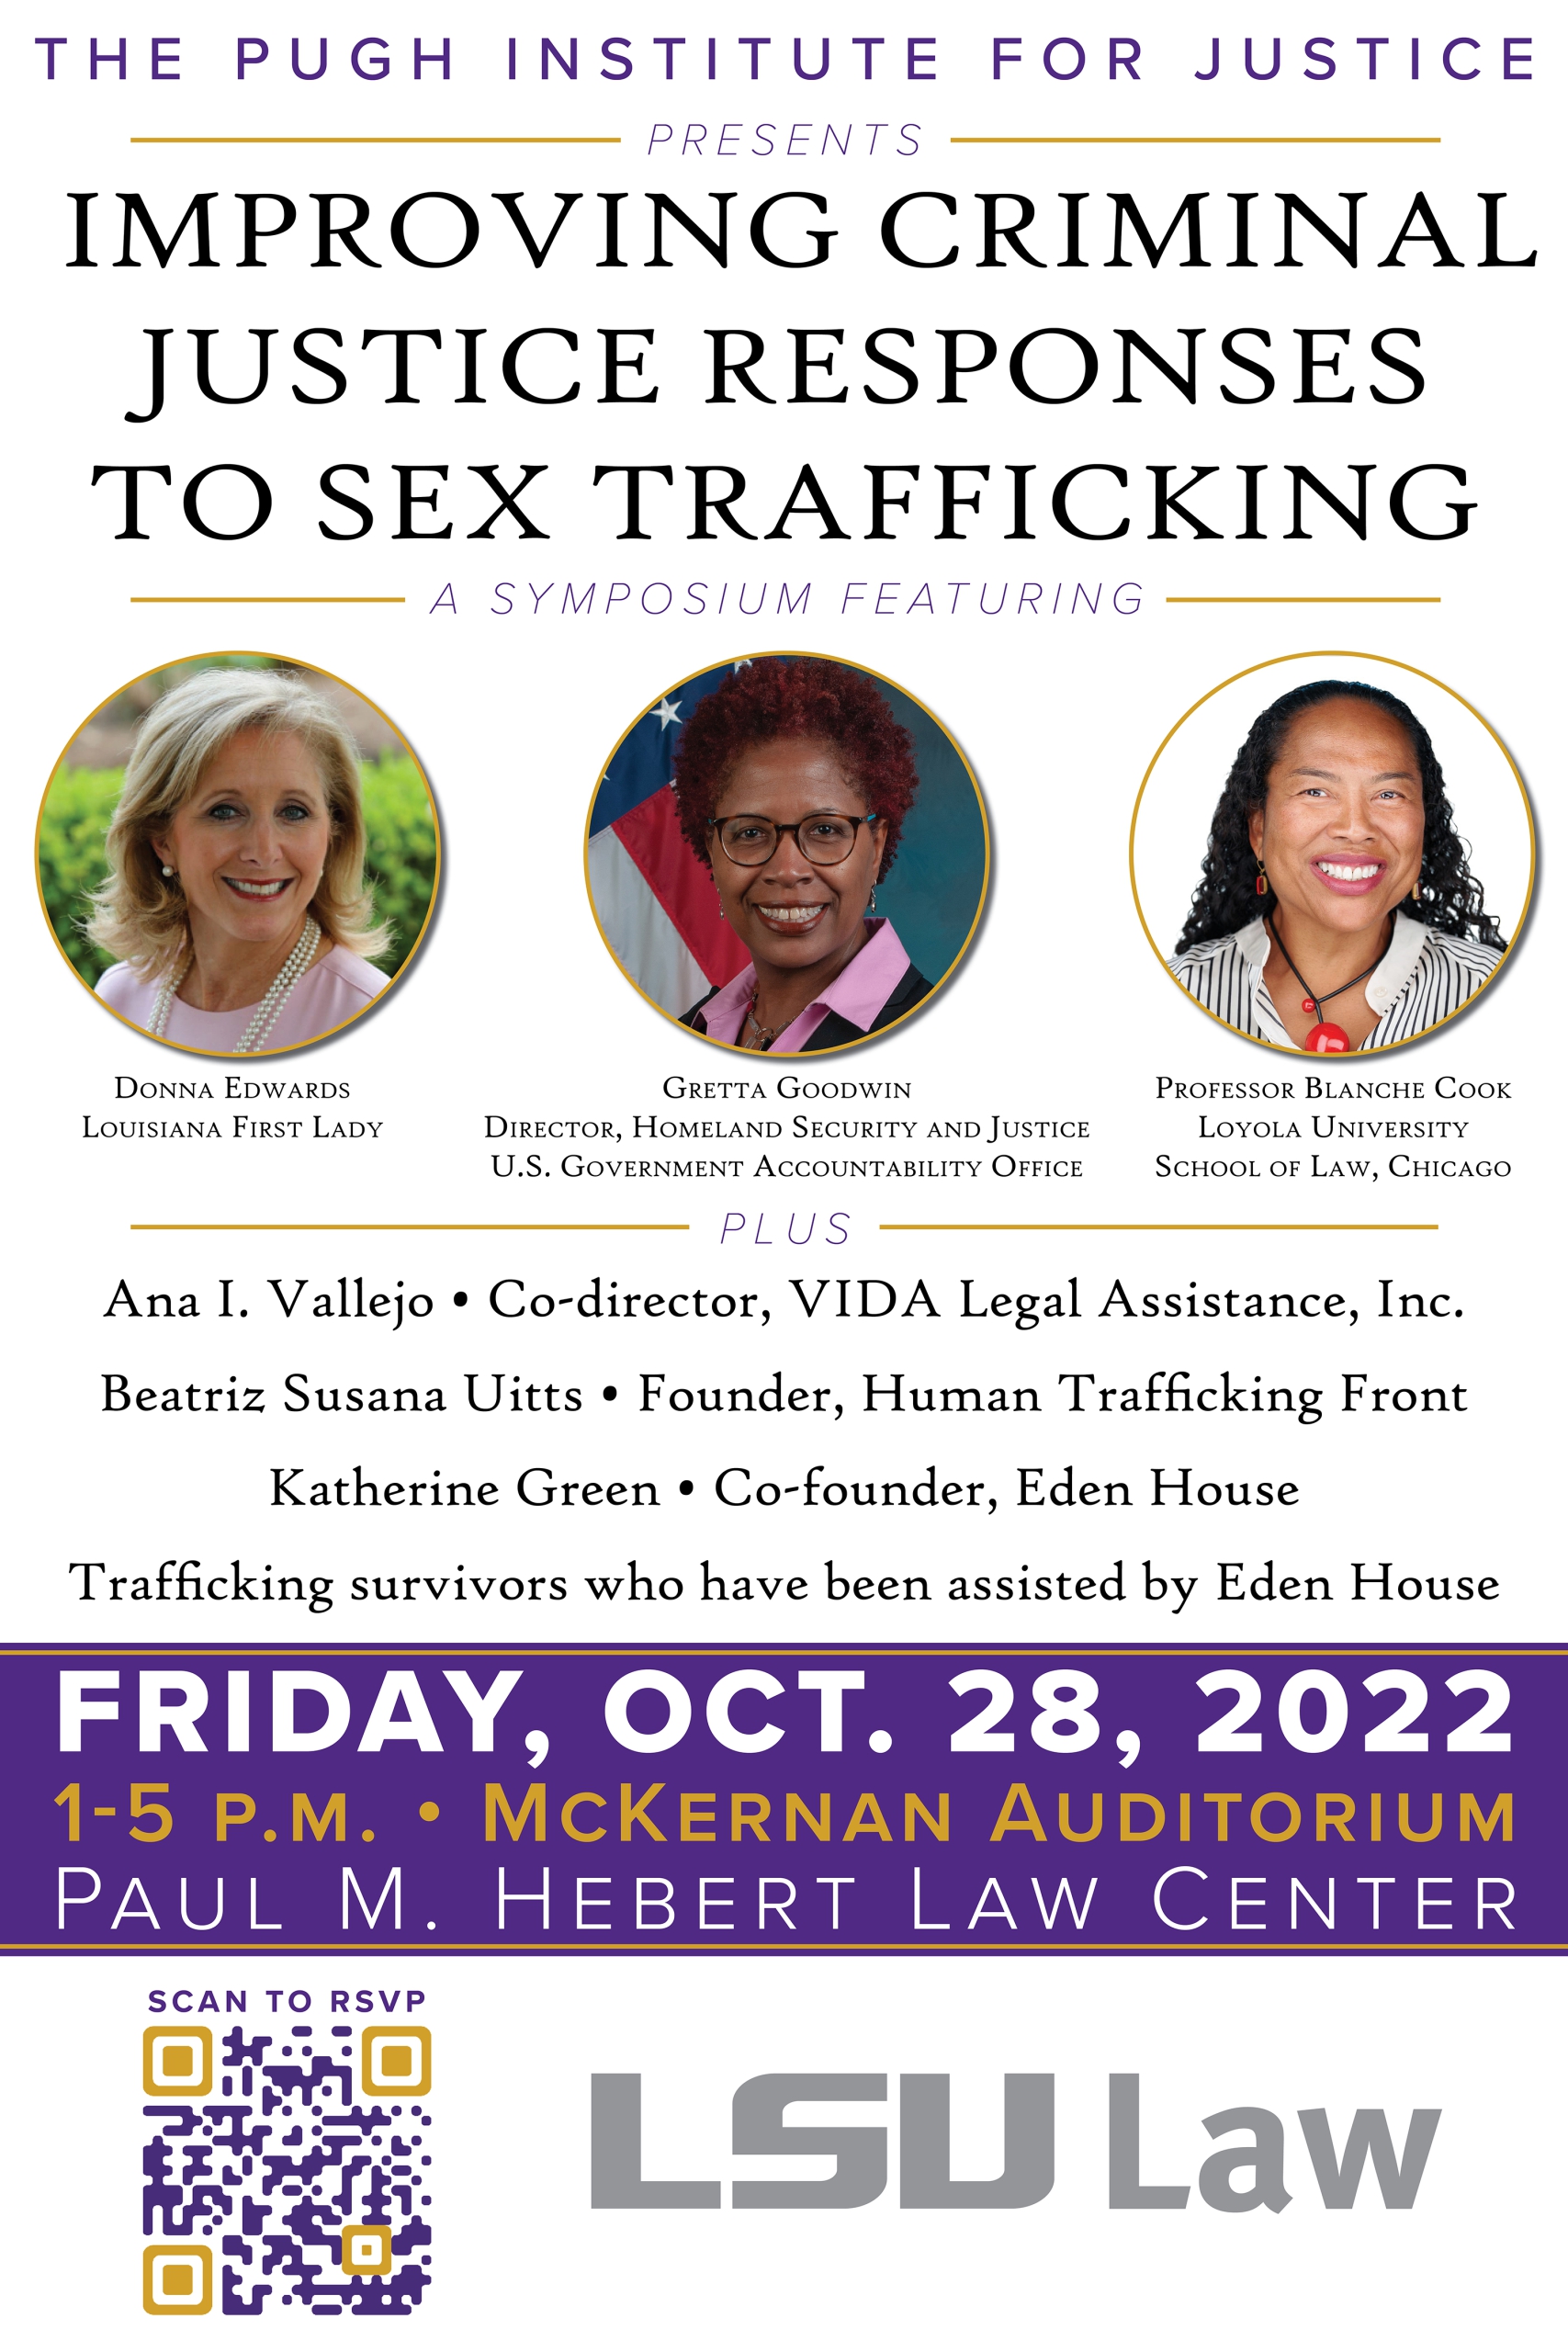 Louisiana First Lady Donna Edwards to join legal scholars, trafficking survivors, and service providers at “Improving Criminal Justice Responses to Sex Trafficking” symposium at LSU Law on Friday, image